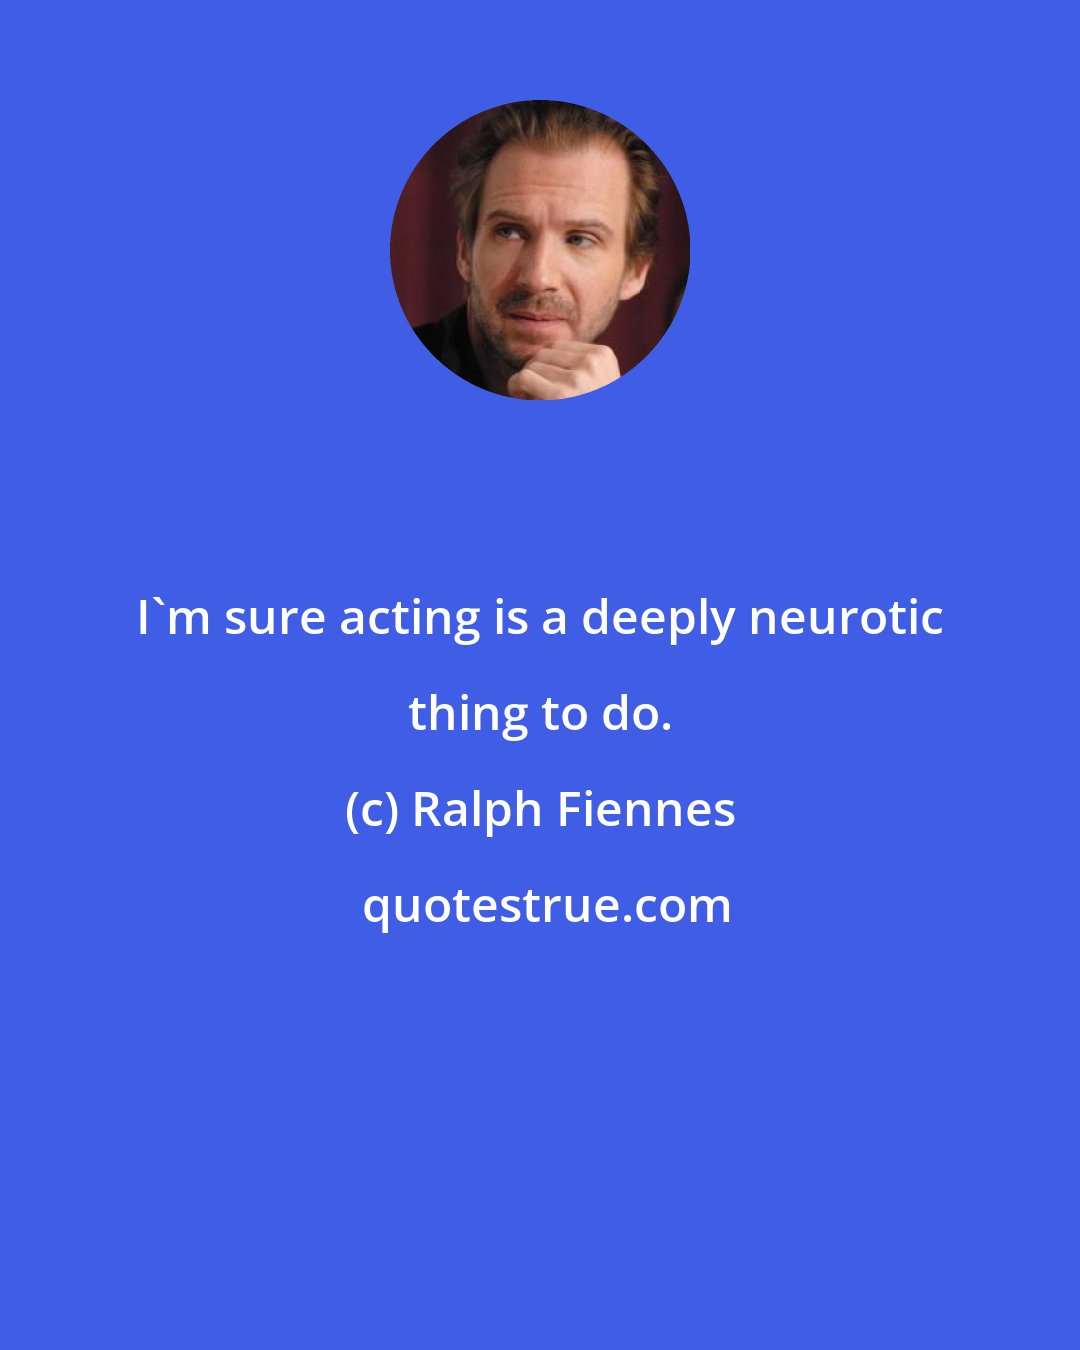 Ralph Fiennes: I'm sure acting is a deeply neurotic thing to do.